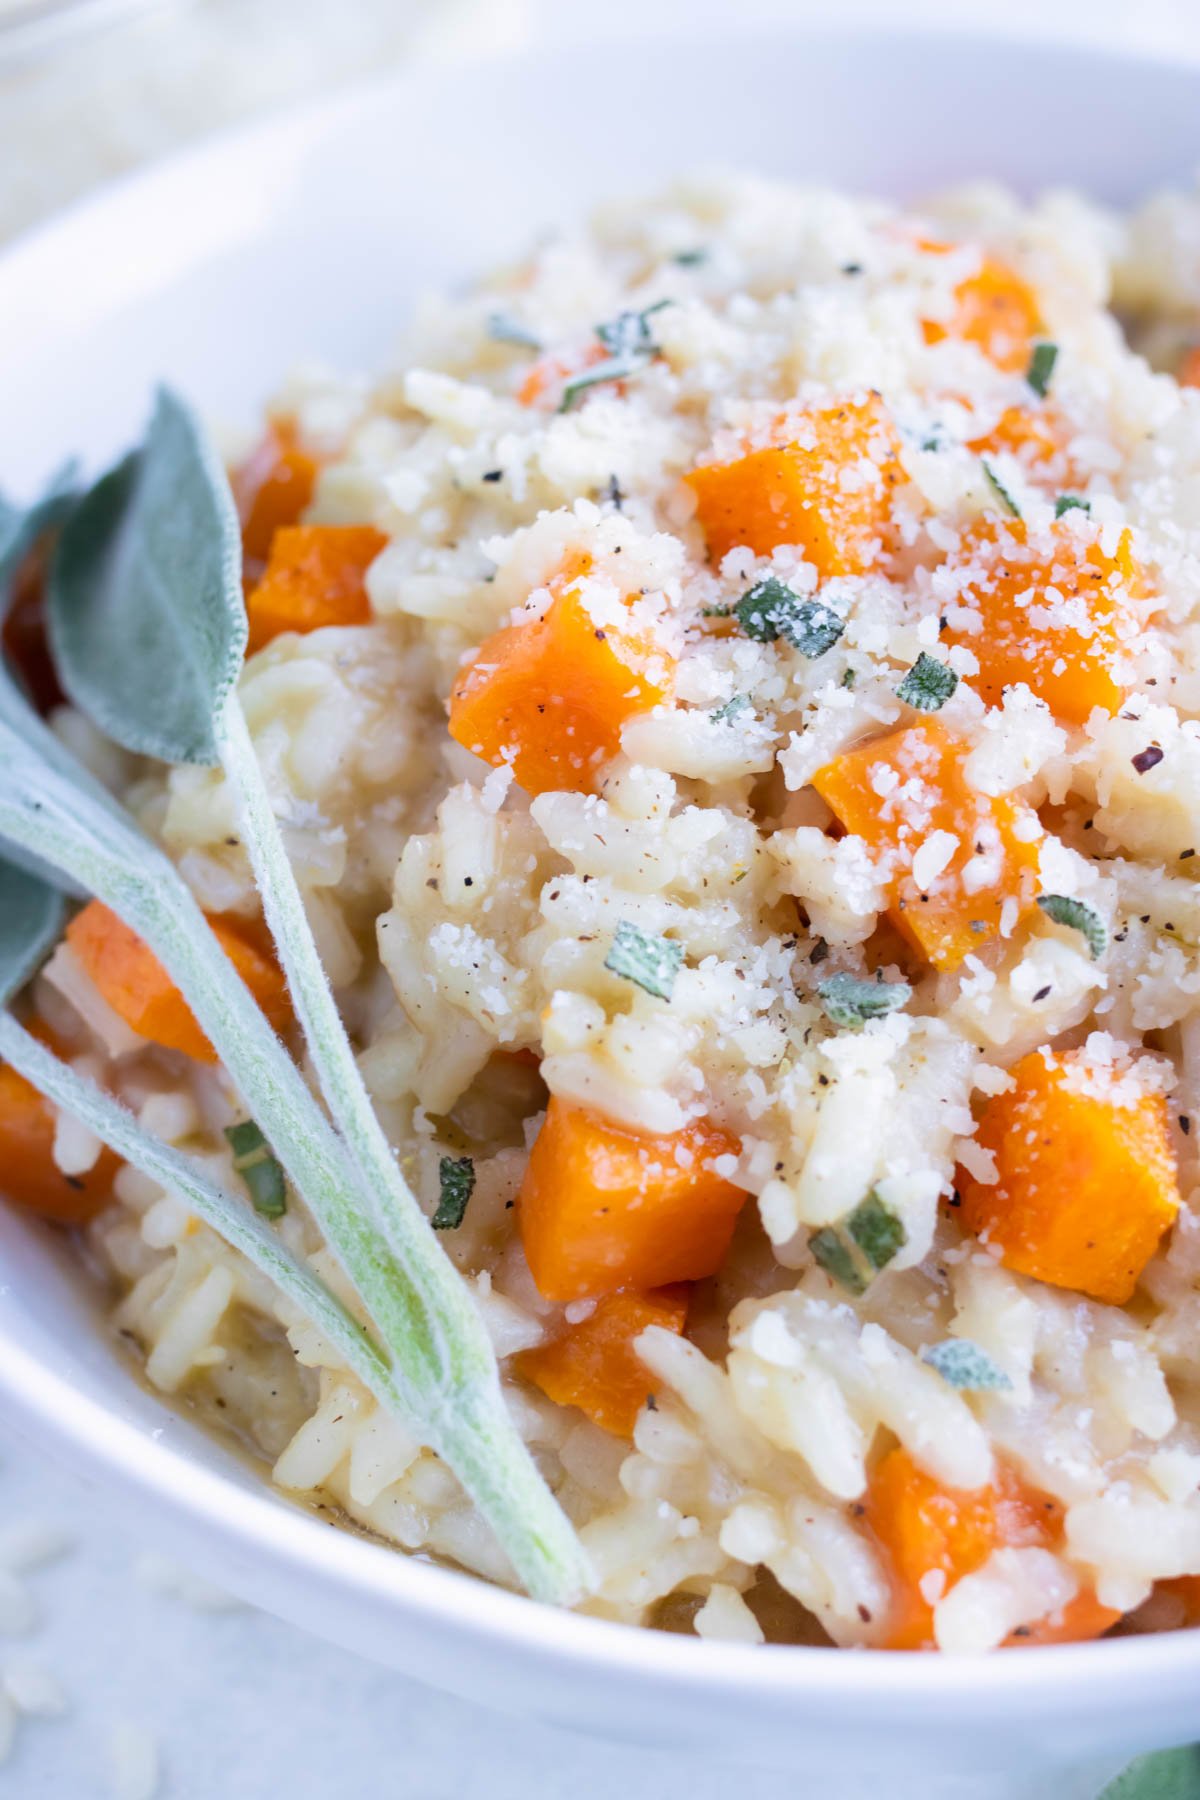 Roasted butternut squash risotto is served in a bowl for an Italian dish.